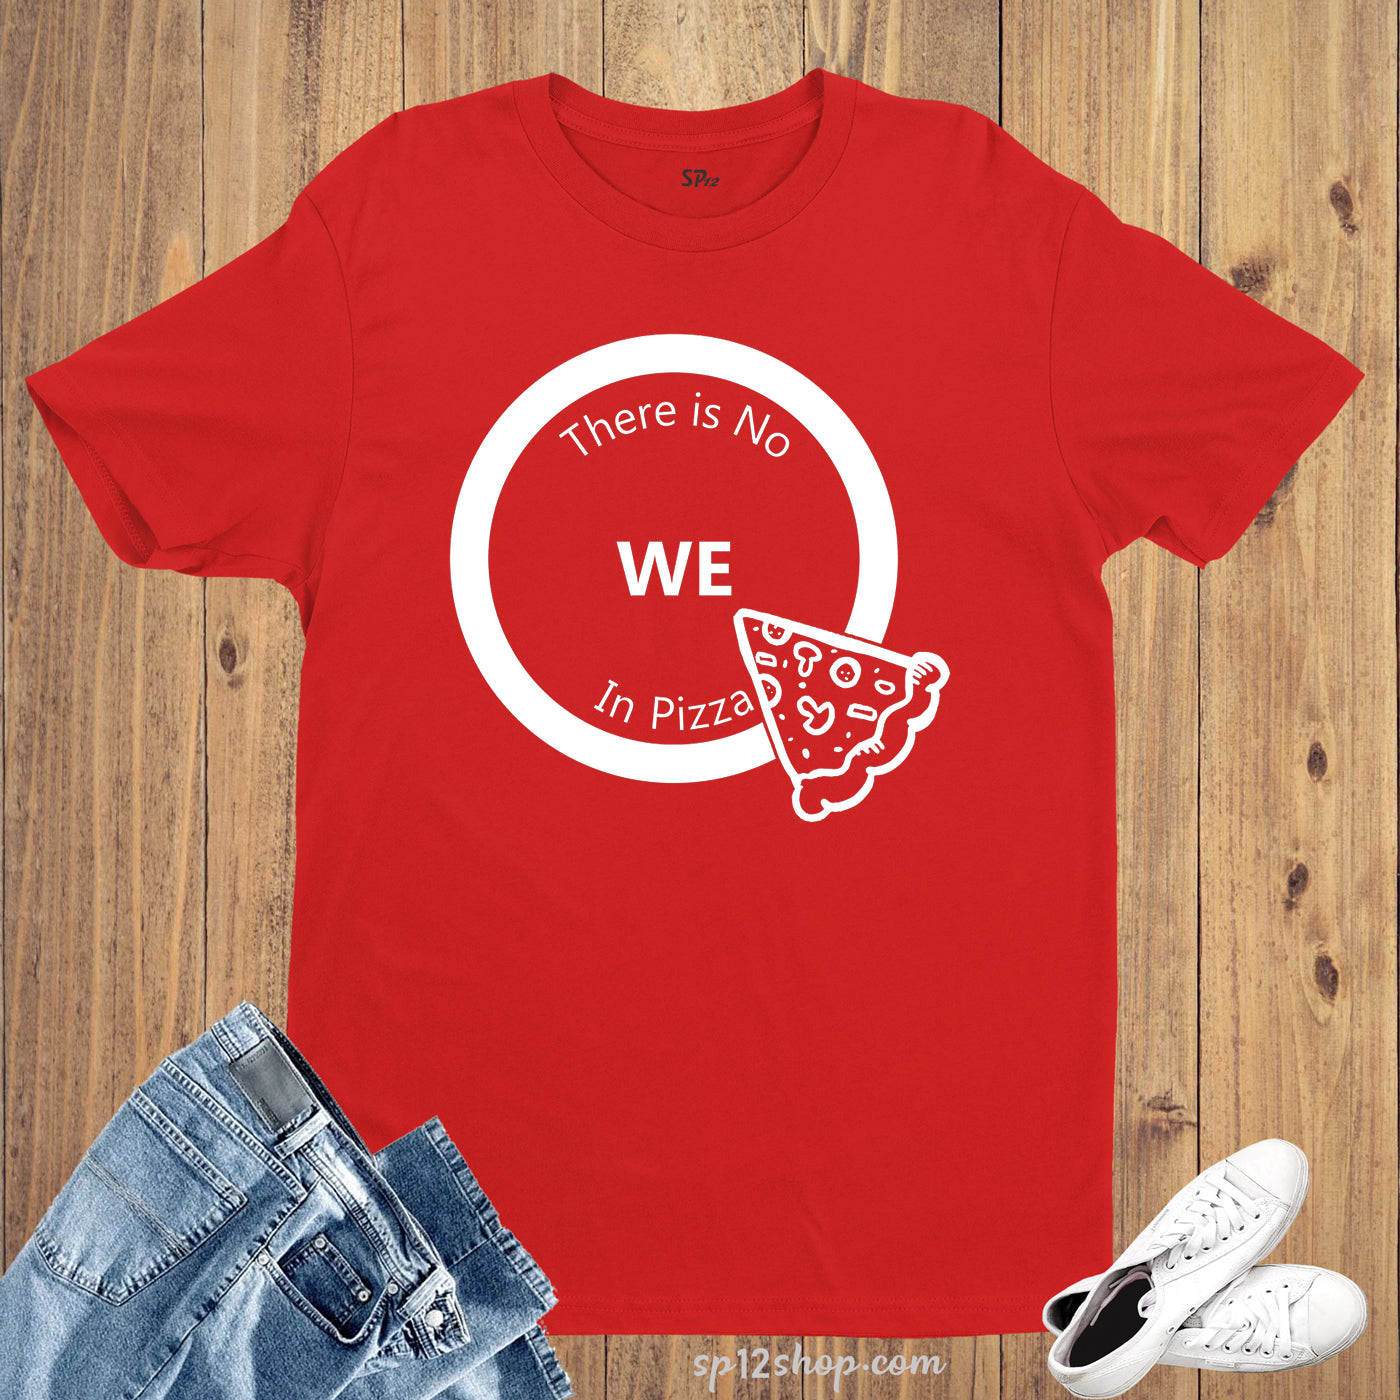 No We in Pizza Funny Humorous Comical Slogan T shirt